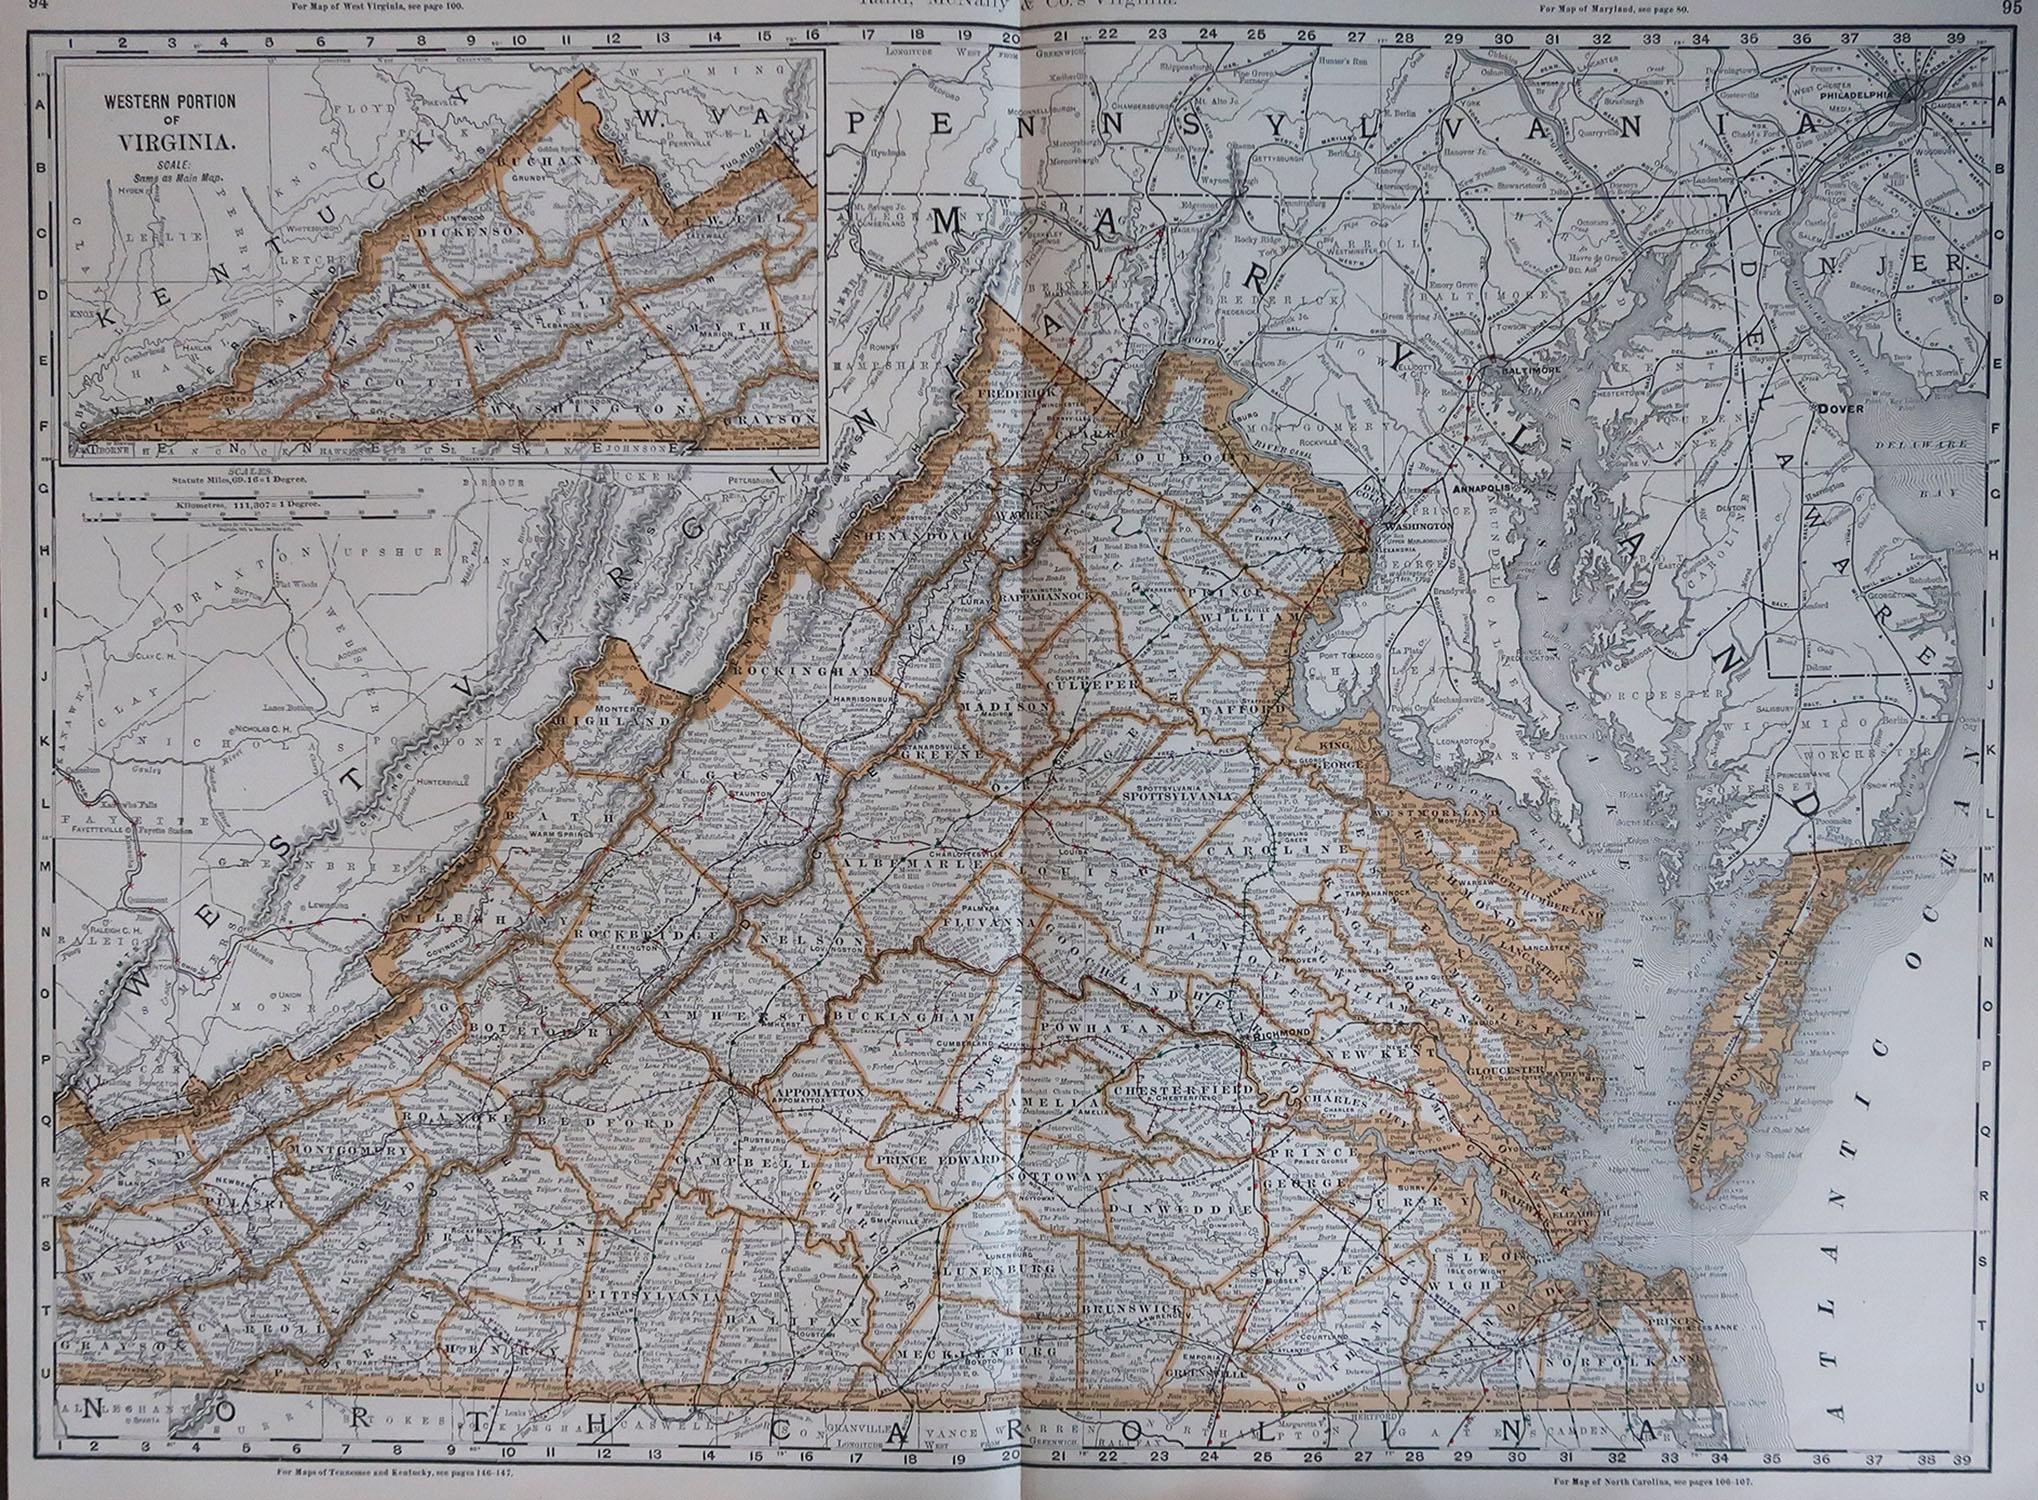 Fabulous map of Virginia

Original color

By Rand, McNally & Co.

Published, 1894

Unframed

Free shipping.